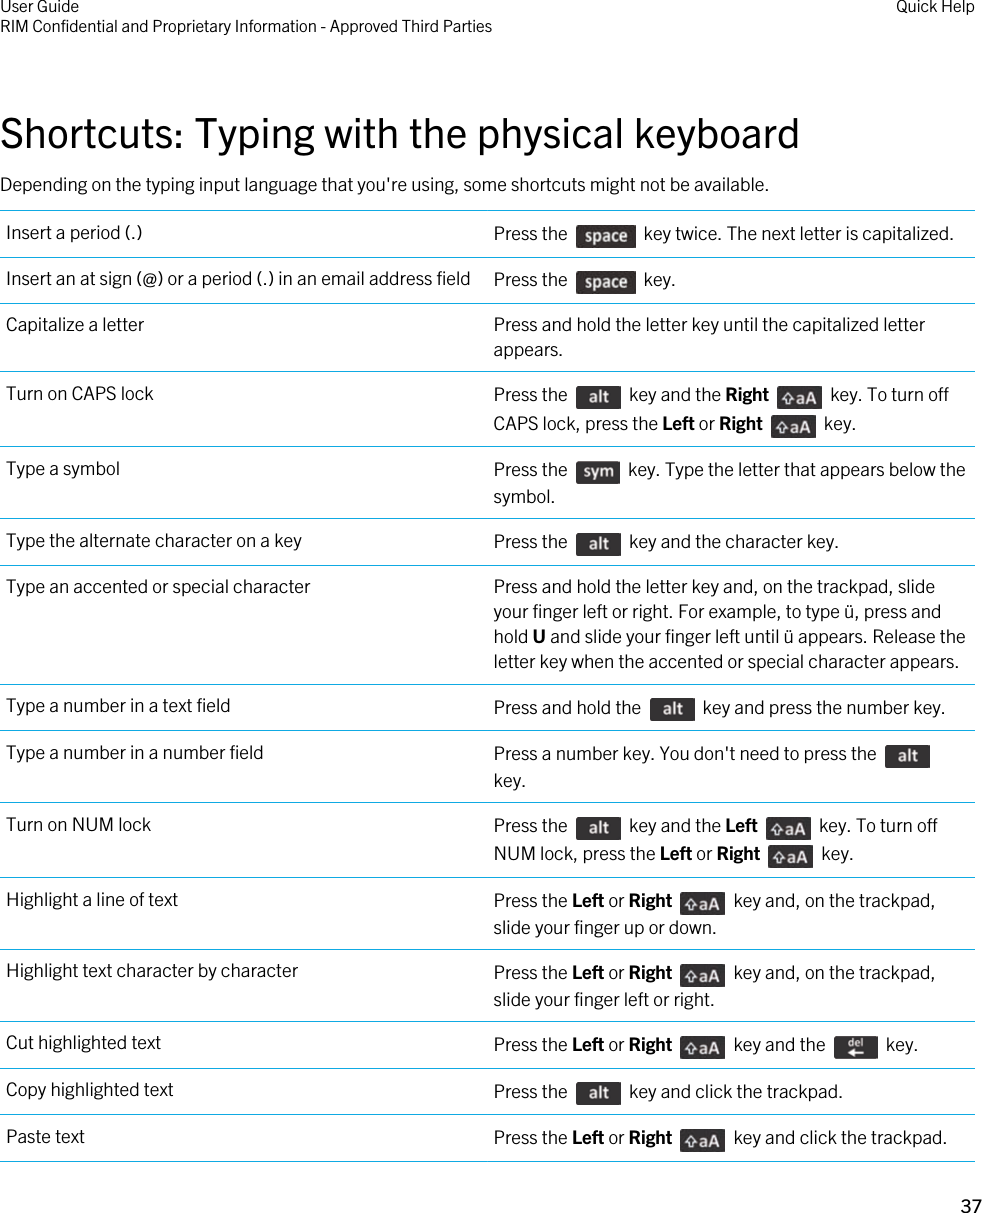 Shortcuts: Typing with the physical keyboardDepending on the typing input language that you&apos;re using, some shortcuts might not be available.Insert a period (.) Press the    key twice. The next letter is capitalized.Insert an at sign (@) or a period (.) in an email address field Press the    key.Capitalize a letter Press and hold the letter key until the capitalized letter appears.Turn on CAPS lock Press the    key and the Right    key. To turn off CAPS lock, press the Left or Right   key.Type a symbol Press the    key. Type the letter that appears below the symbol.Type the alternate character on a key Press the    key and the character key.Type an accented or special character Press and hold the letter key and, on the trackpad, slide your finger left or right. For example, to type ü, press and hold U and slide your finger left until ü appears. Release the letter key when the accented or special character appears.Type a number in a text field Press and hold the    key and press the number key.Type a number in a number field Press a number key. You don&apos;t need to press the key.Turn on NUM lock Press the    key and the Left    key. To turn off NUM lock, press the Left or Right    key.Highlight a line of text Press the Left or Right   key and, on the trackpad, slide your finger up or down.Highlight text character by character Press the Left or Right   key and, on the trackpad, slide your finger left or right.Cut highlighted text Press the Left or Right   key and the    key.Copy highlighted text Press the    key and click the trackpad.Paste text Press the Left or Right   key and click the trackpad.User GuideRIM Confidential and Proprietary Information - Approved Third Parties Quick Help37 